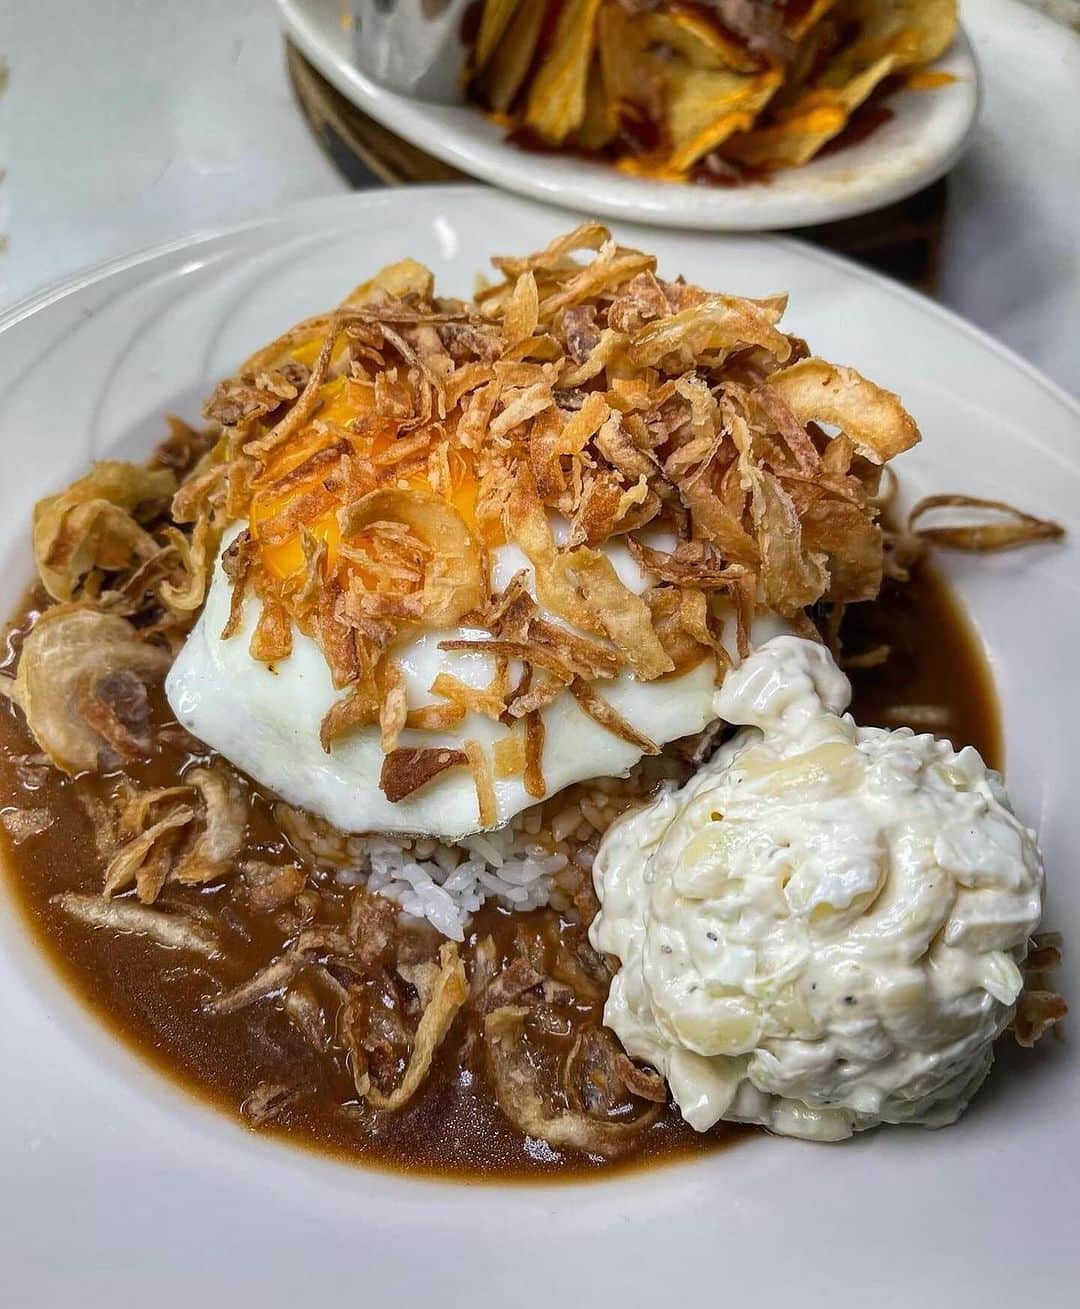 alohatable_waikikiのインスタグラム：「Customize your Loco Moco to your liking! Pictured above is our Loco Moco with fried onions and a side of macaroni salad! Comment below what you would like on yours!!  #zetton #locomoco #hawaiian #classic #customize #macsalad #waikiki」